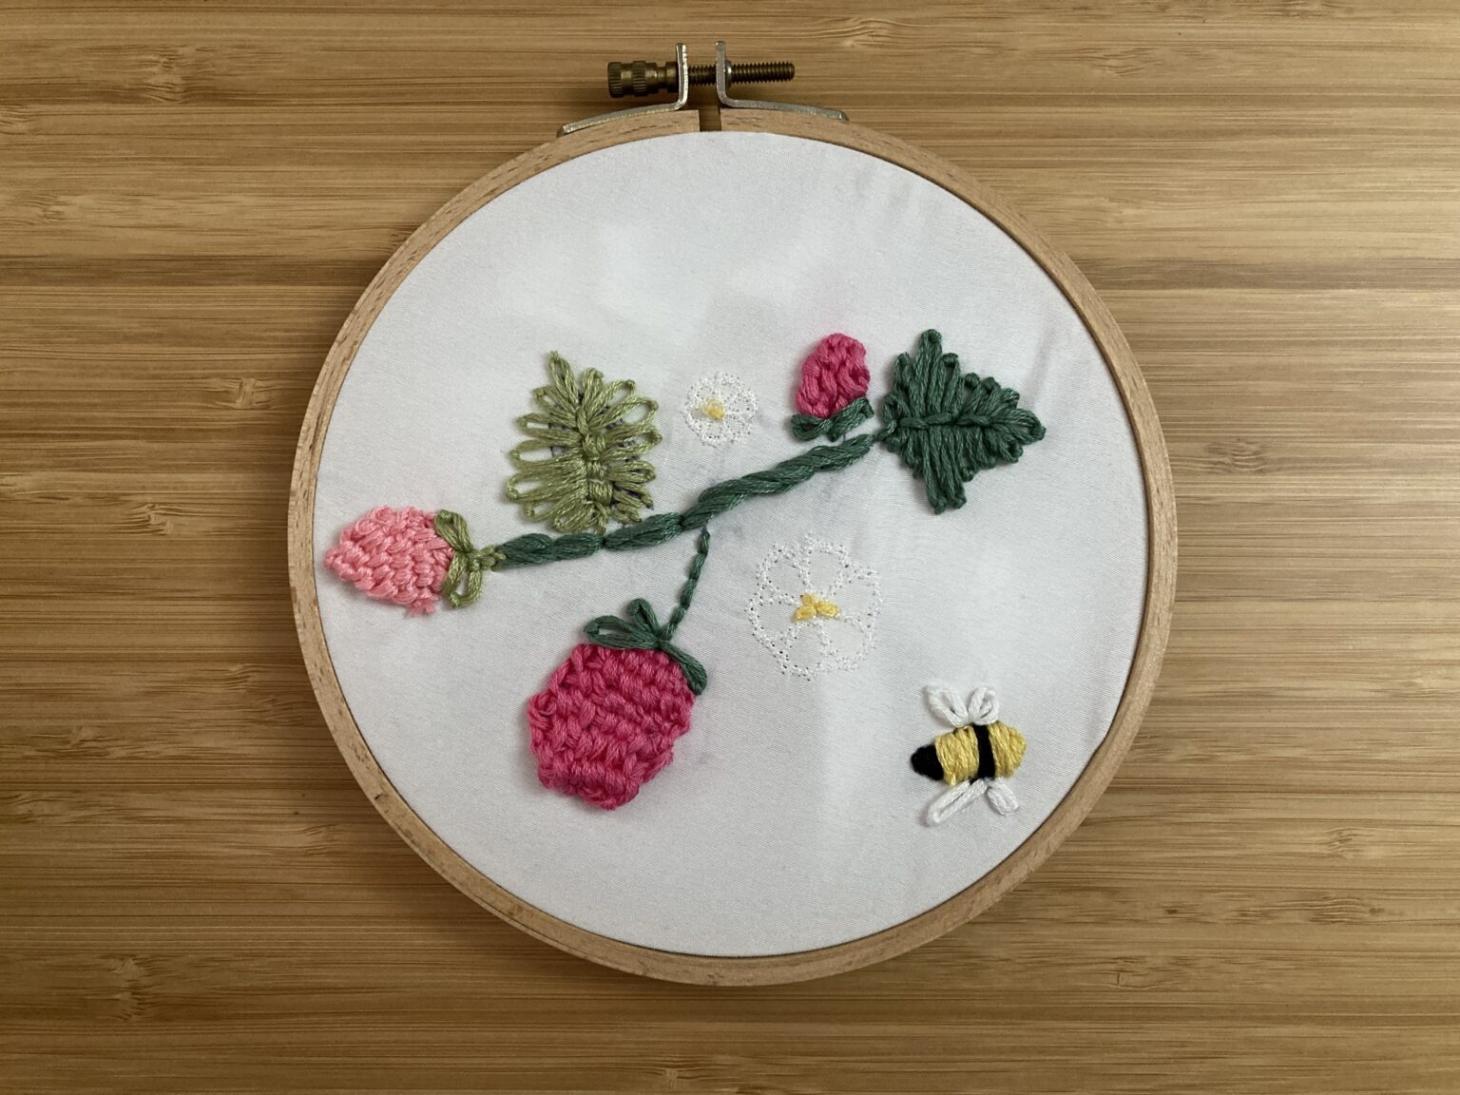 a student stitched plants with code, then hand embroidered a bee.